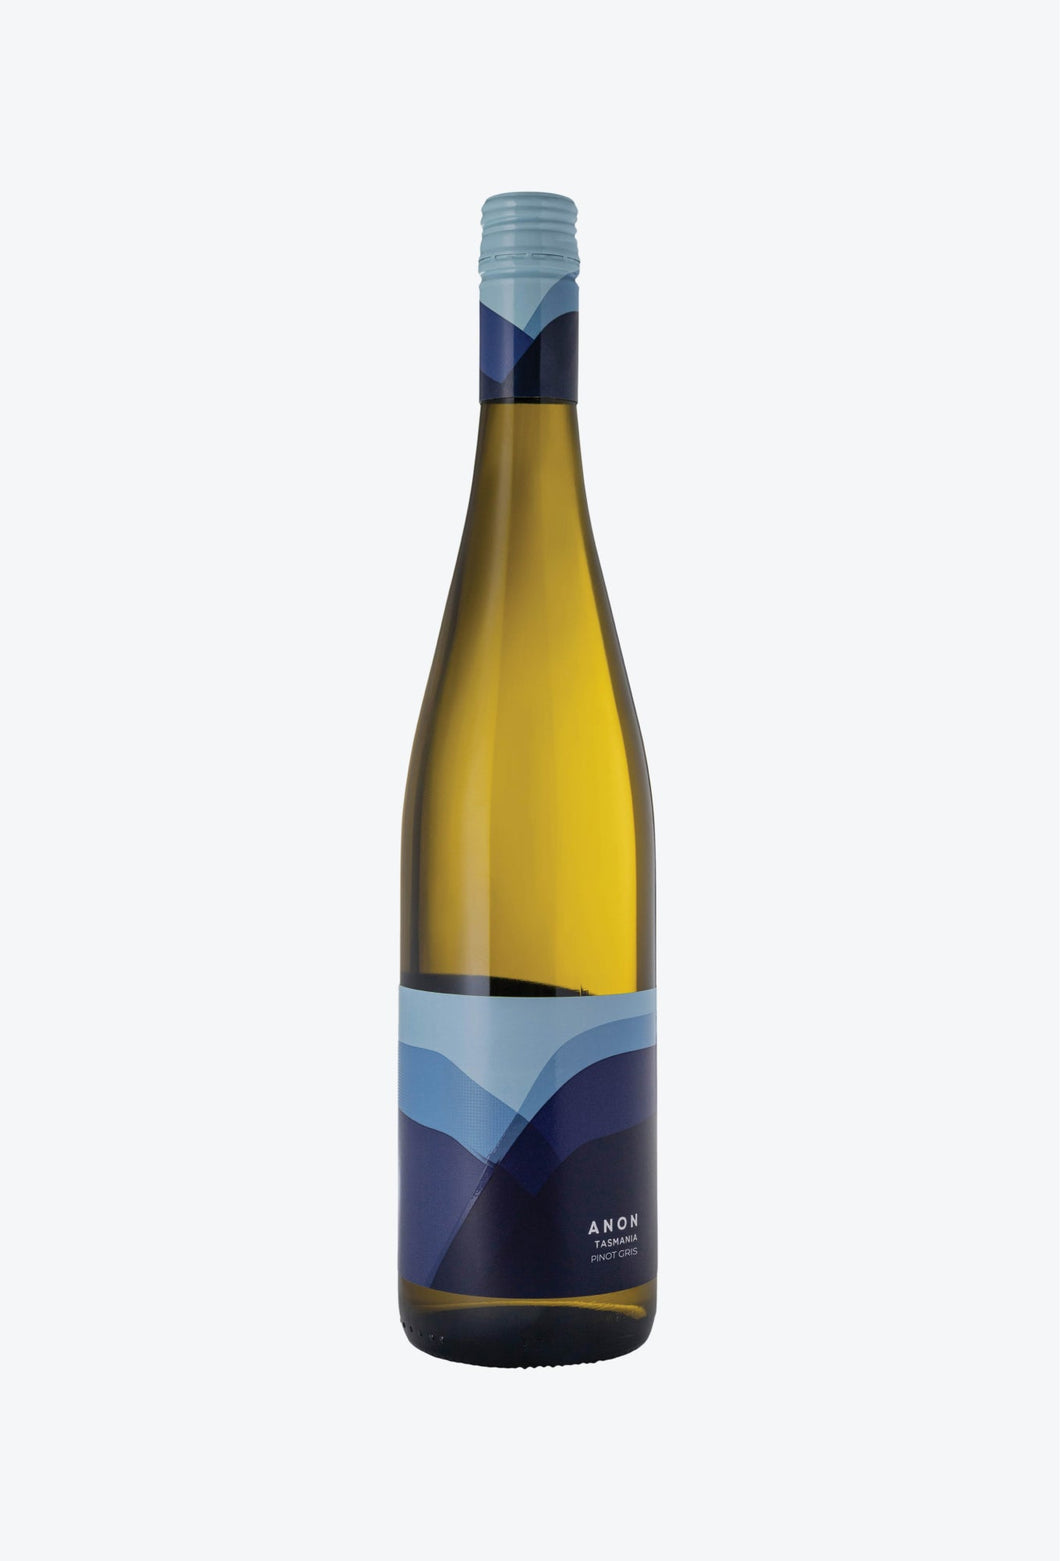 2022 Anon Pinot Gris